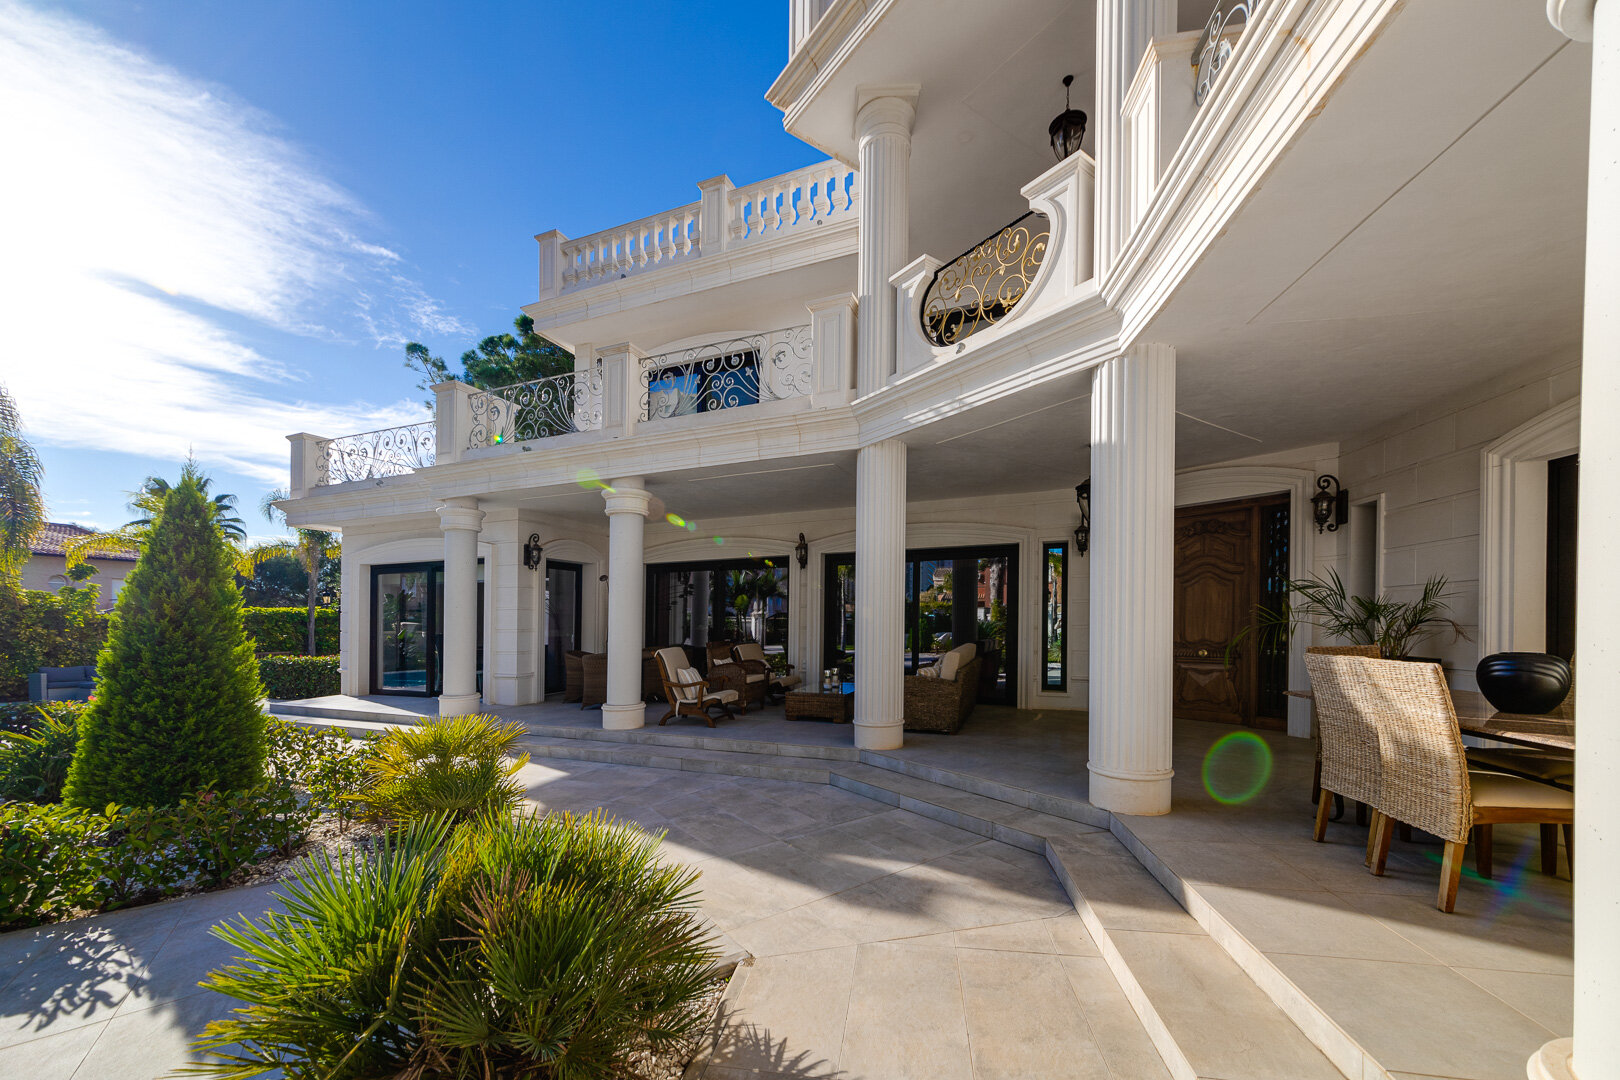 5 Bedroom Classic Luxury Villa with Modern Construction - Campoamor